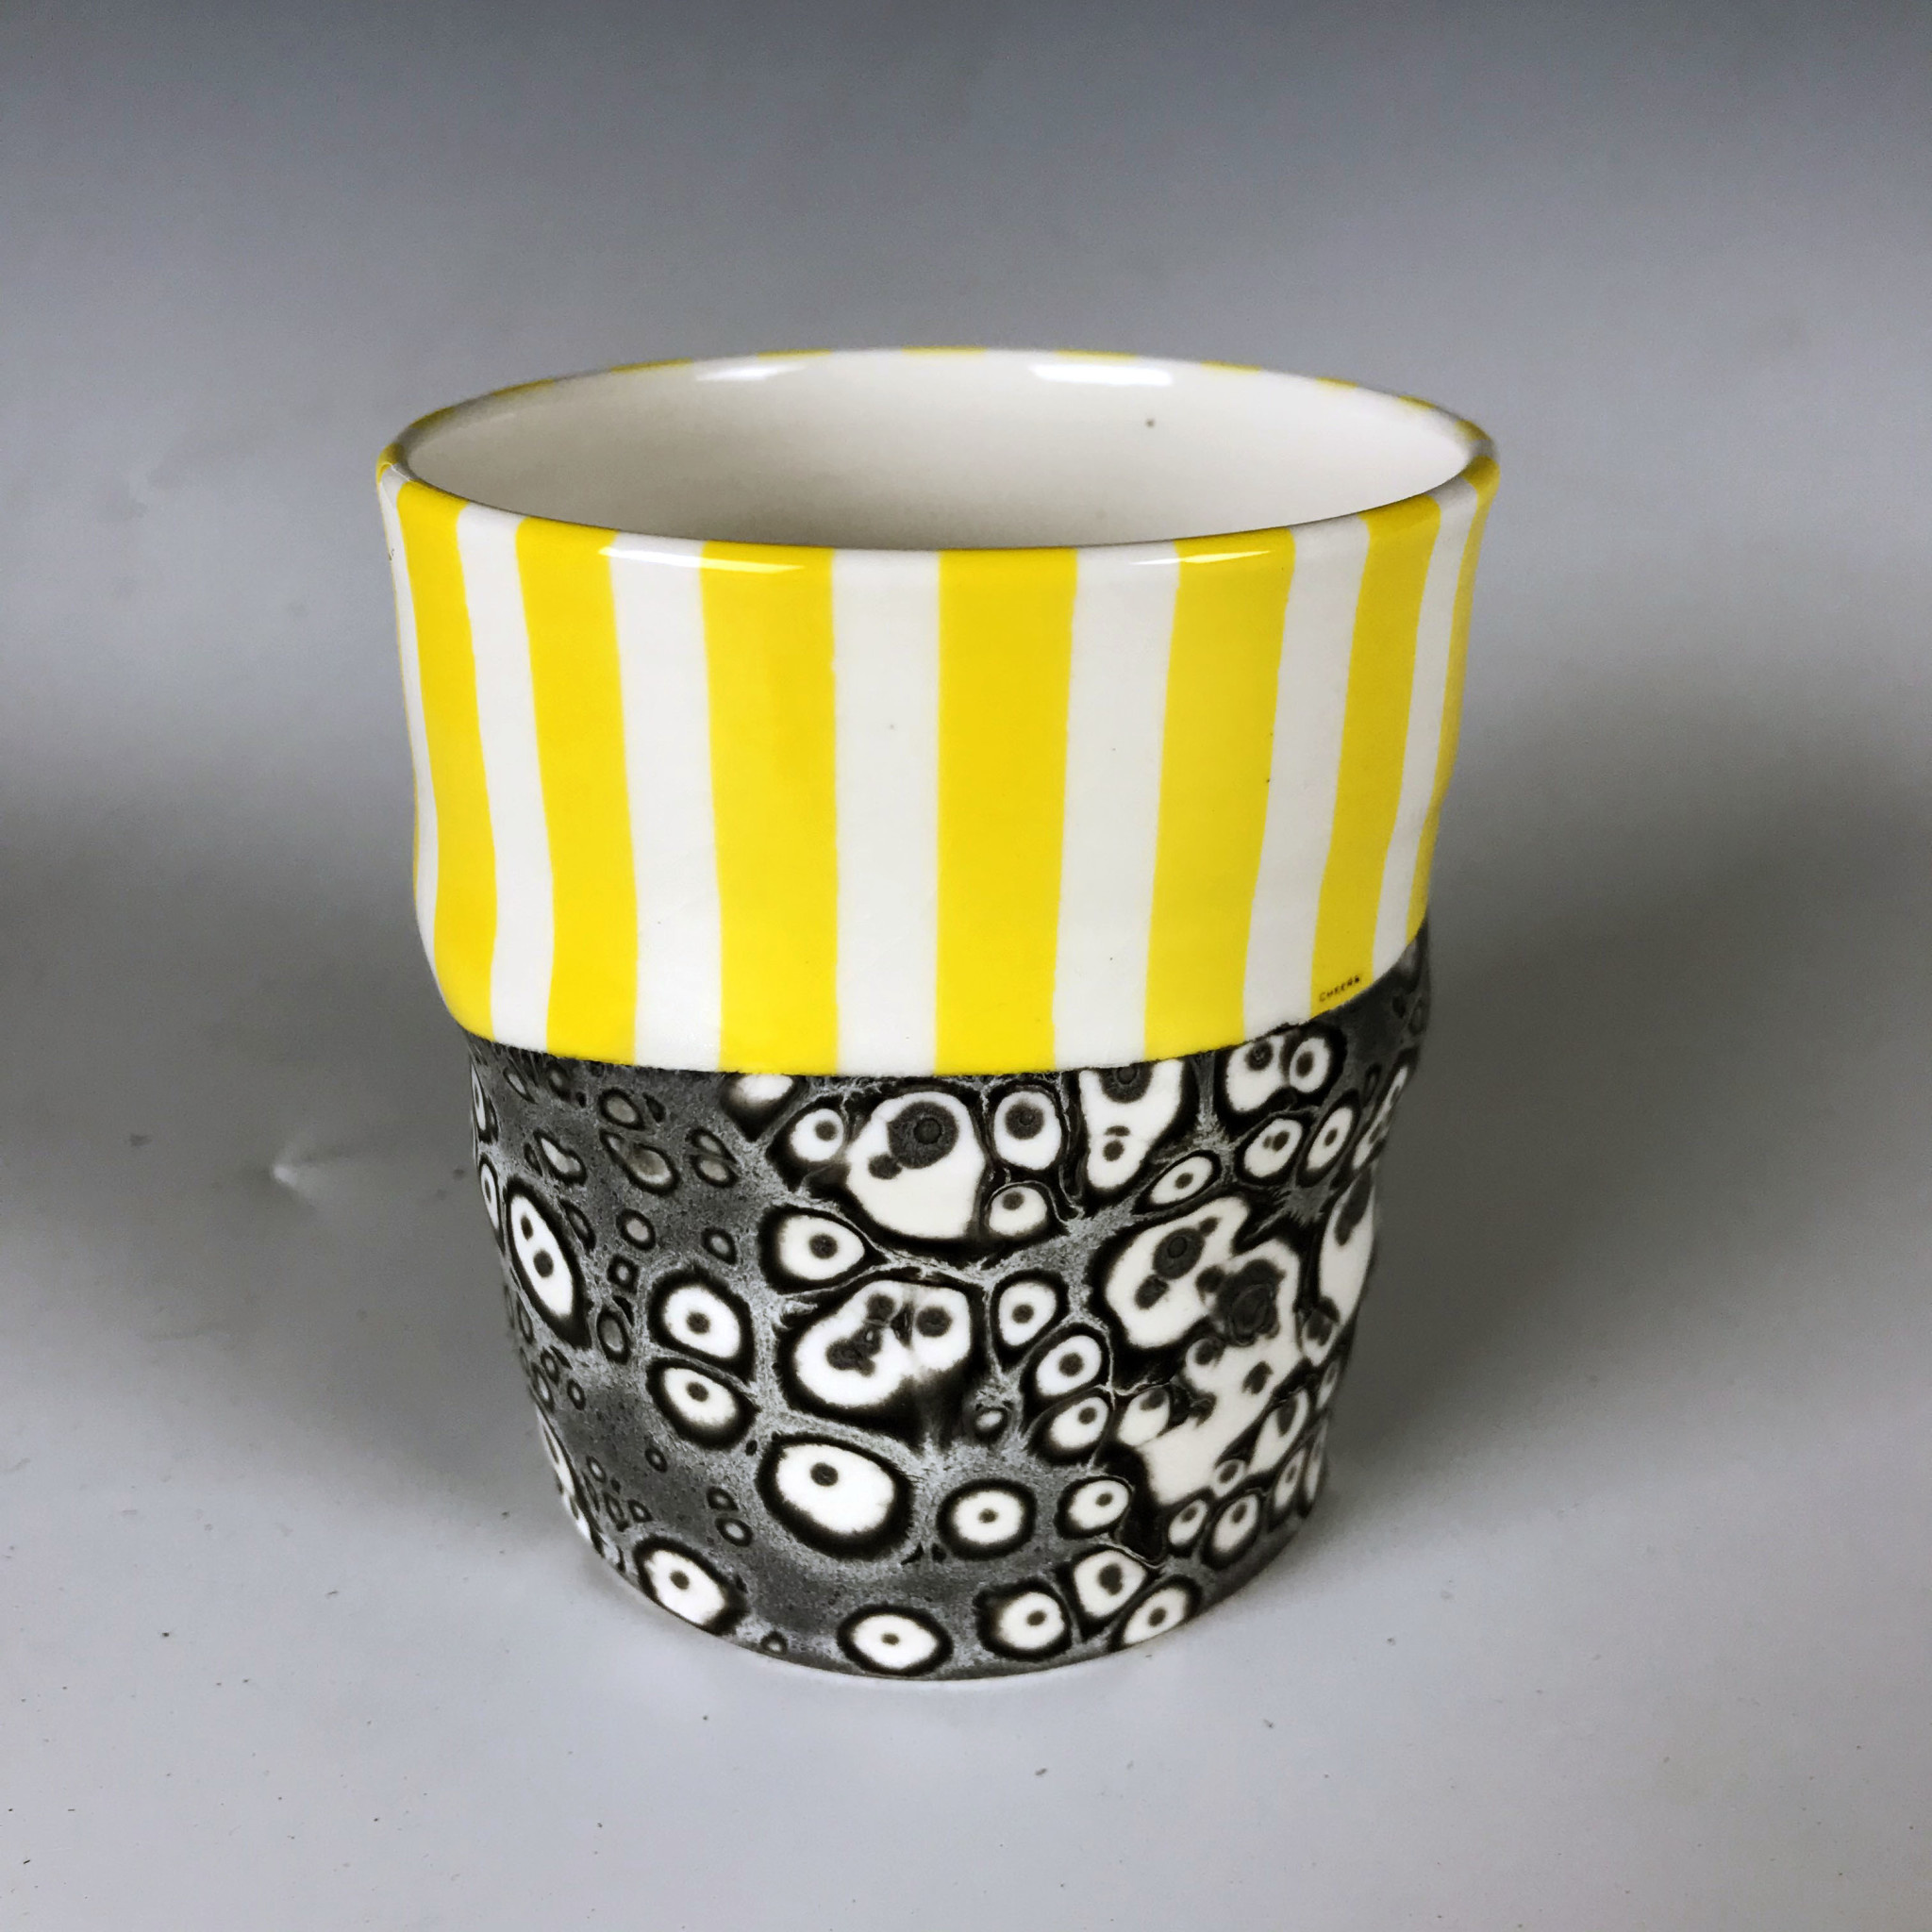 Adrian Sandstrom Yellow Striped Cup